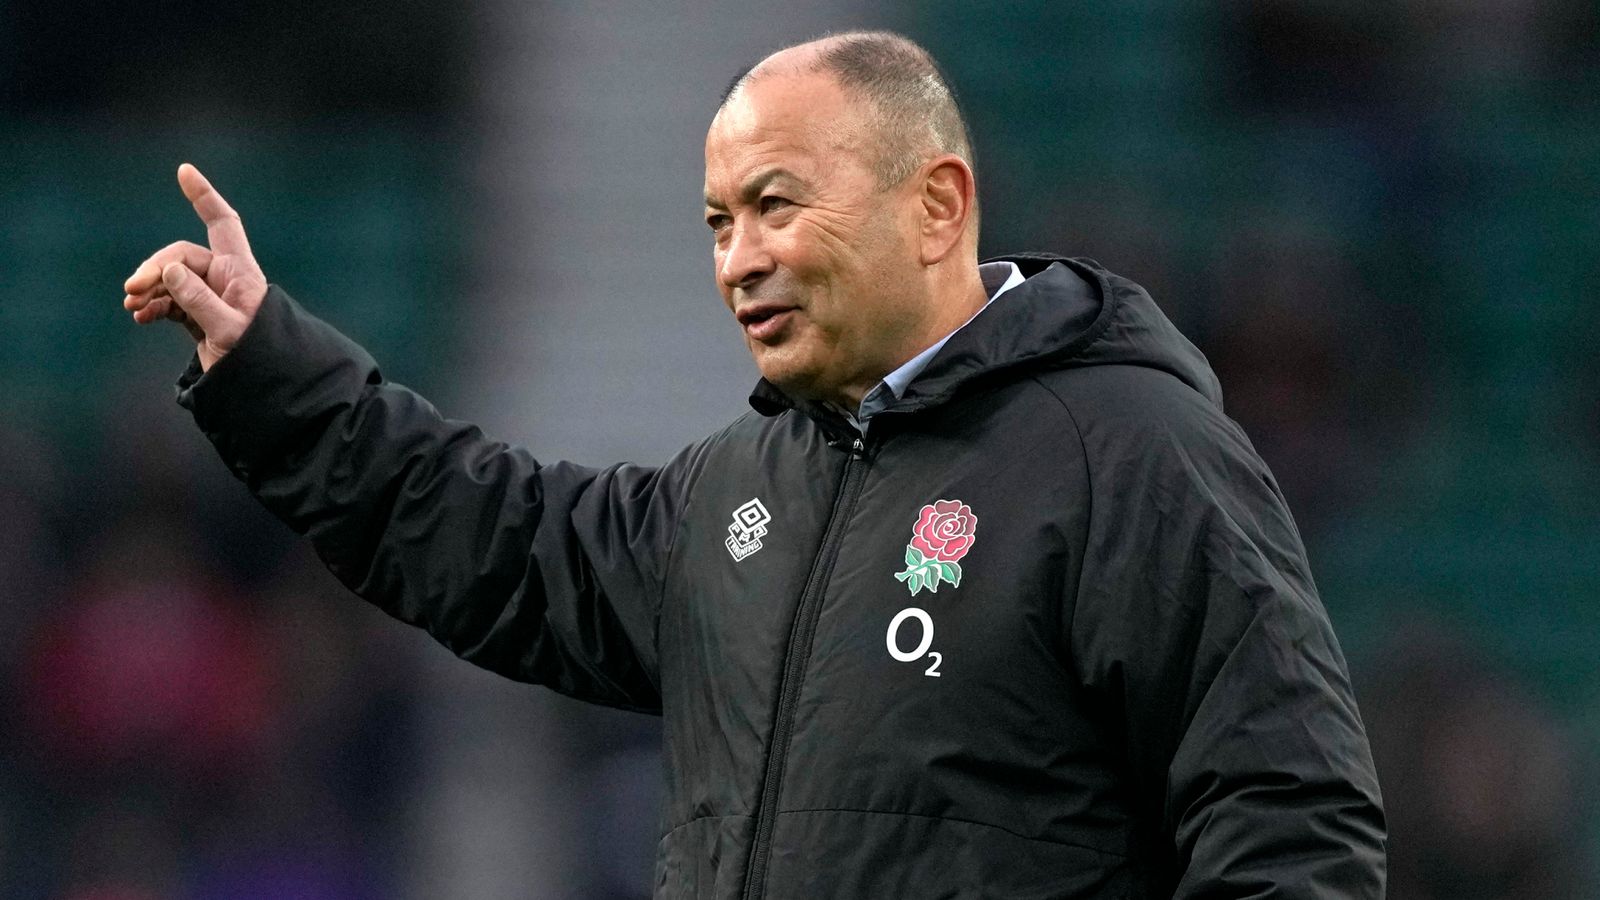 Six Nations 2022: England head coach Eddie Jones calls up six uncapped players for training week